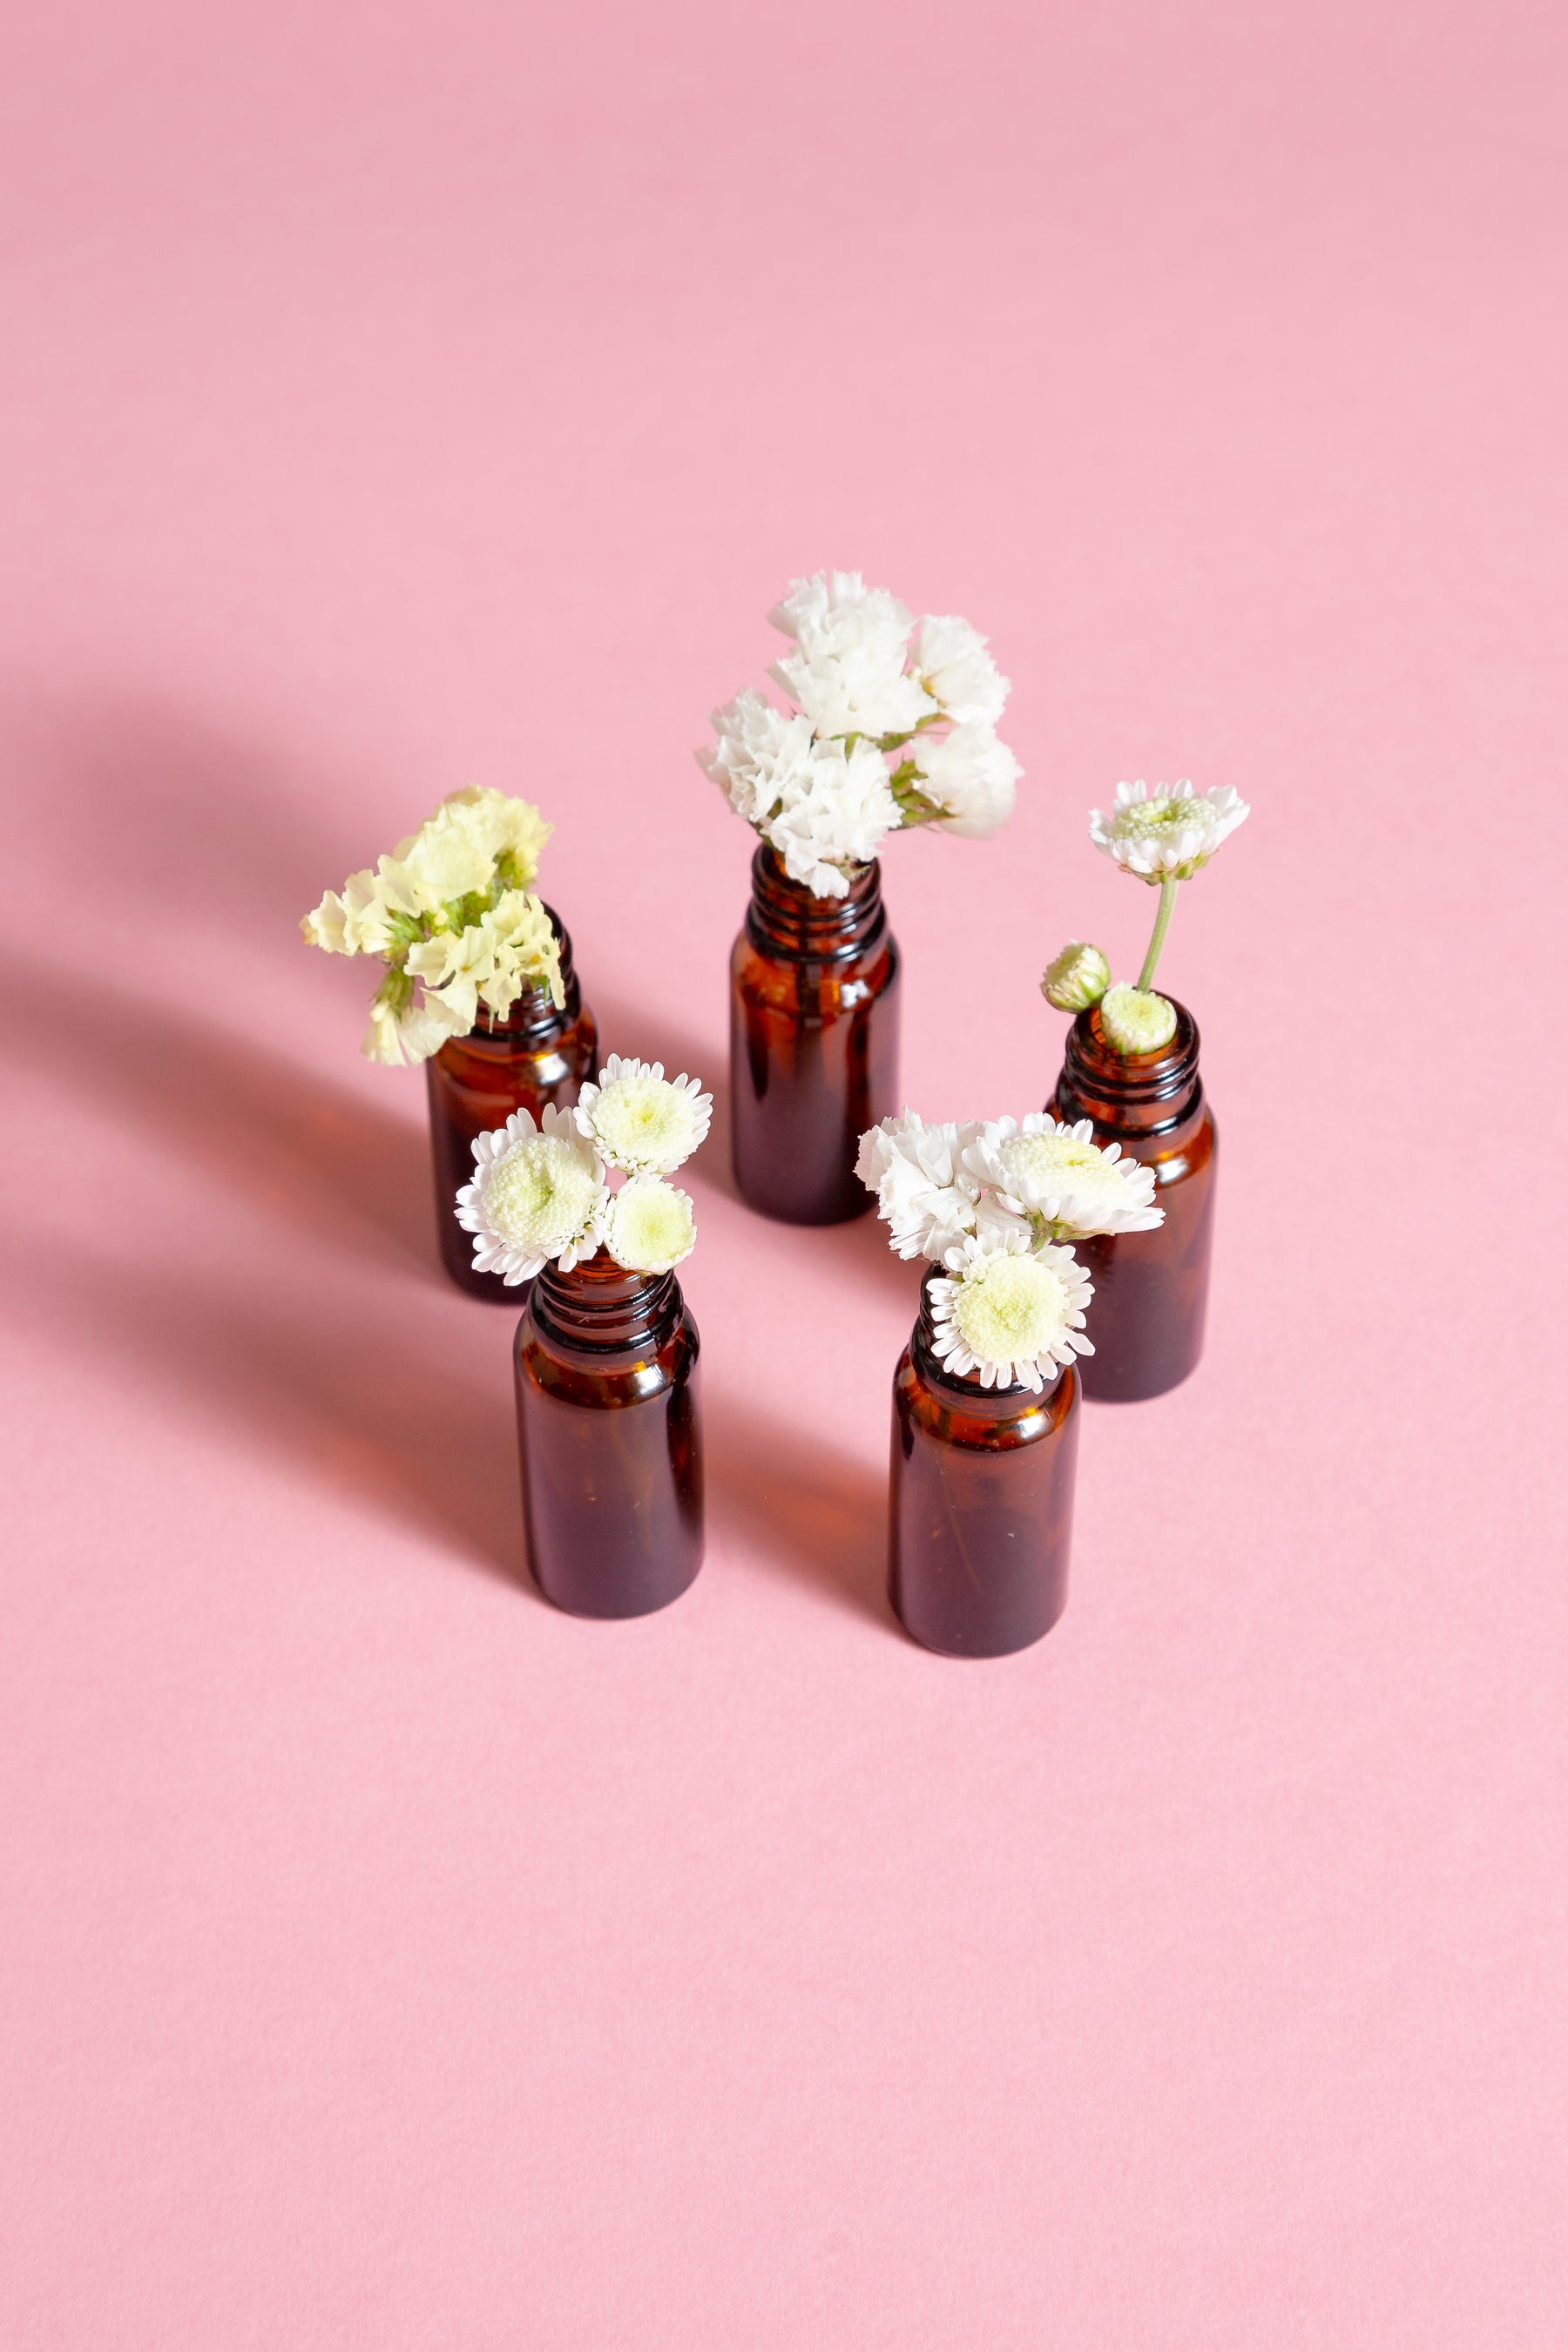 Essential Oils for Menstrual Cramps: Natural Relief